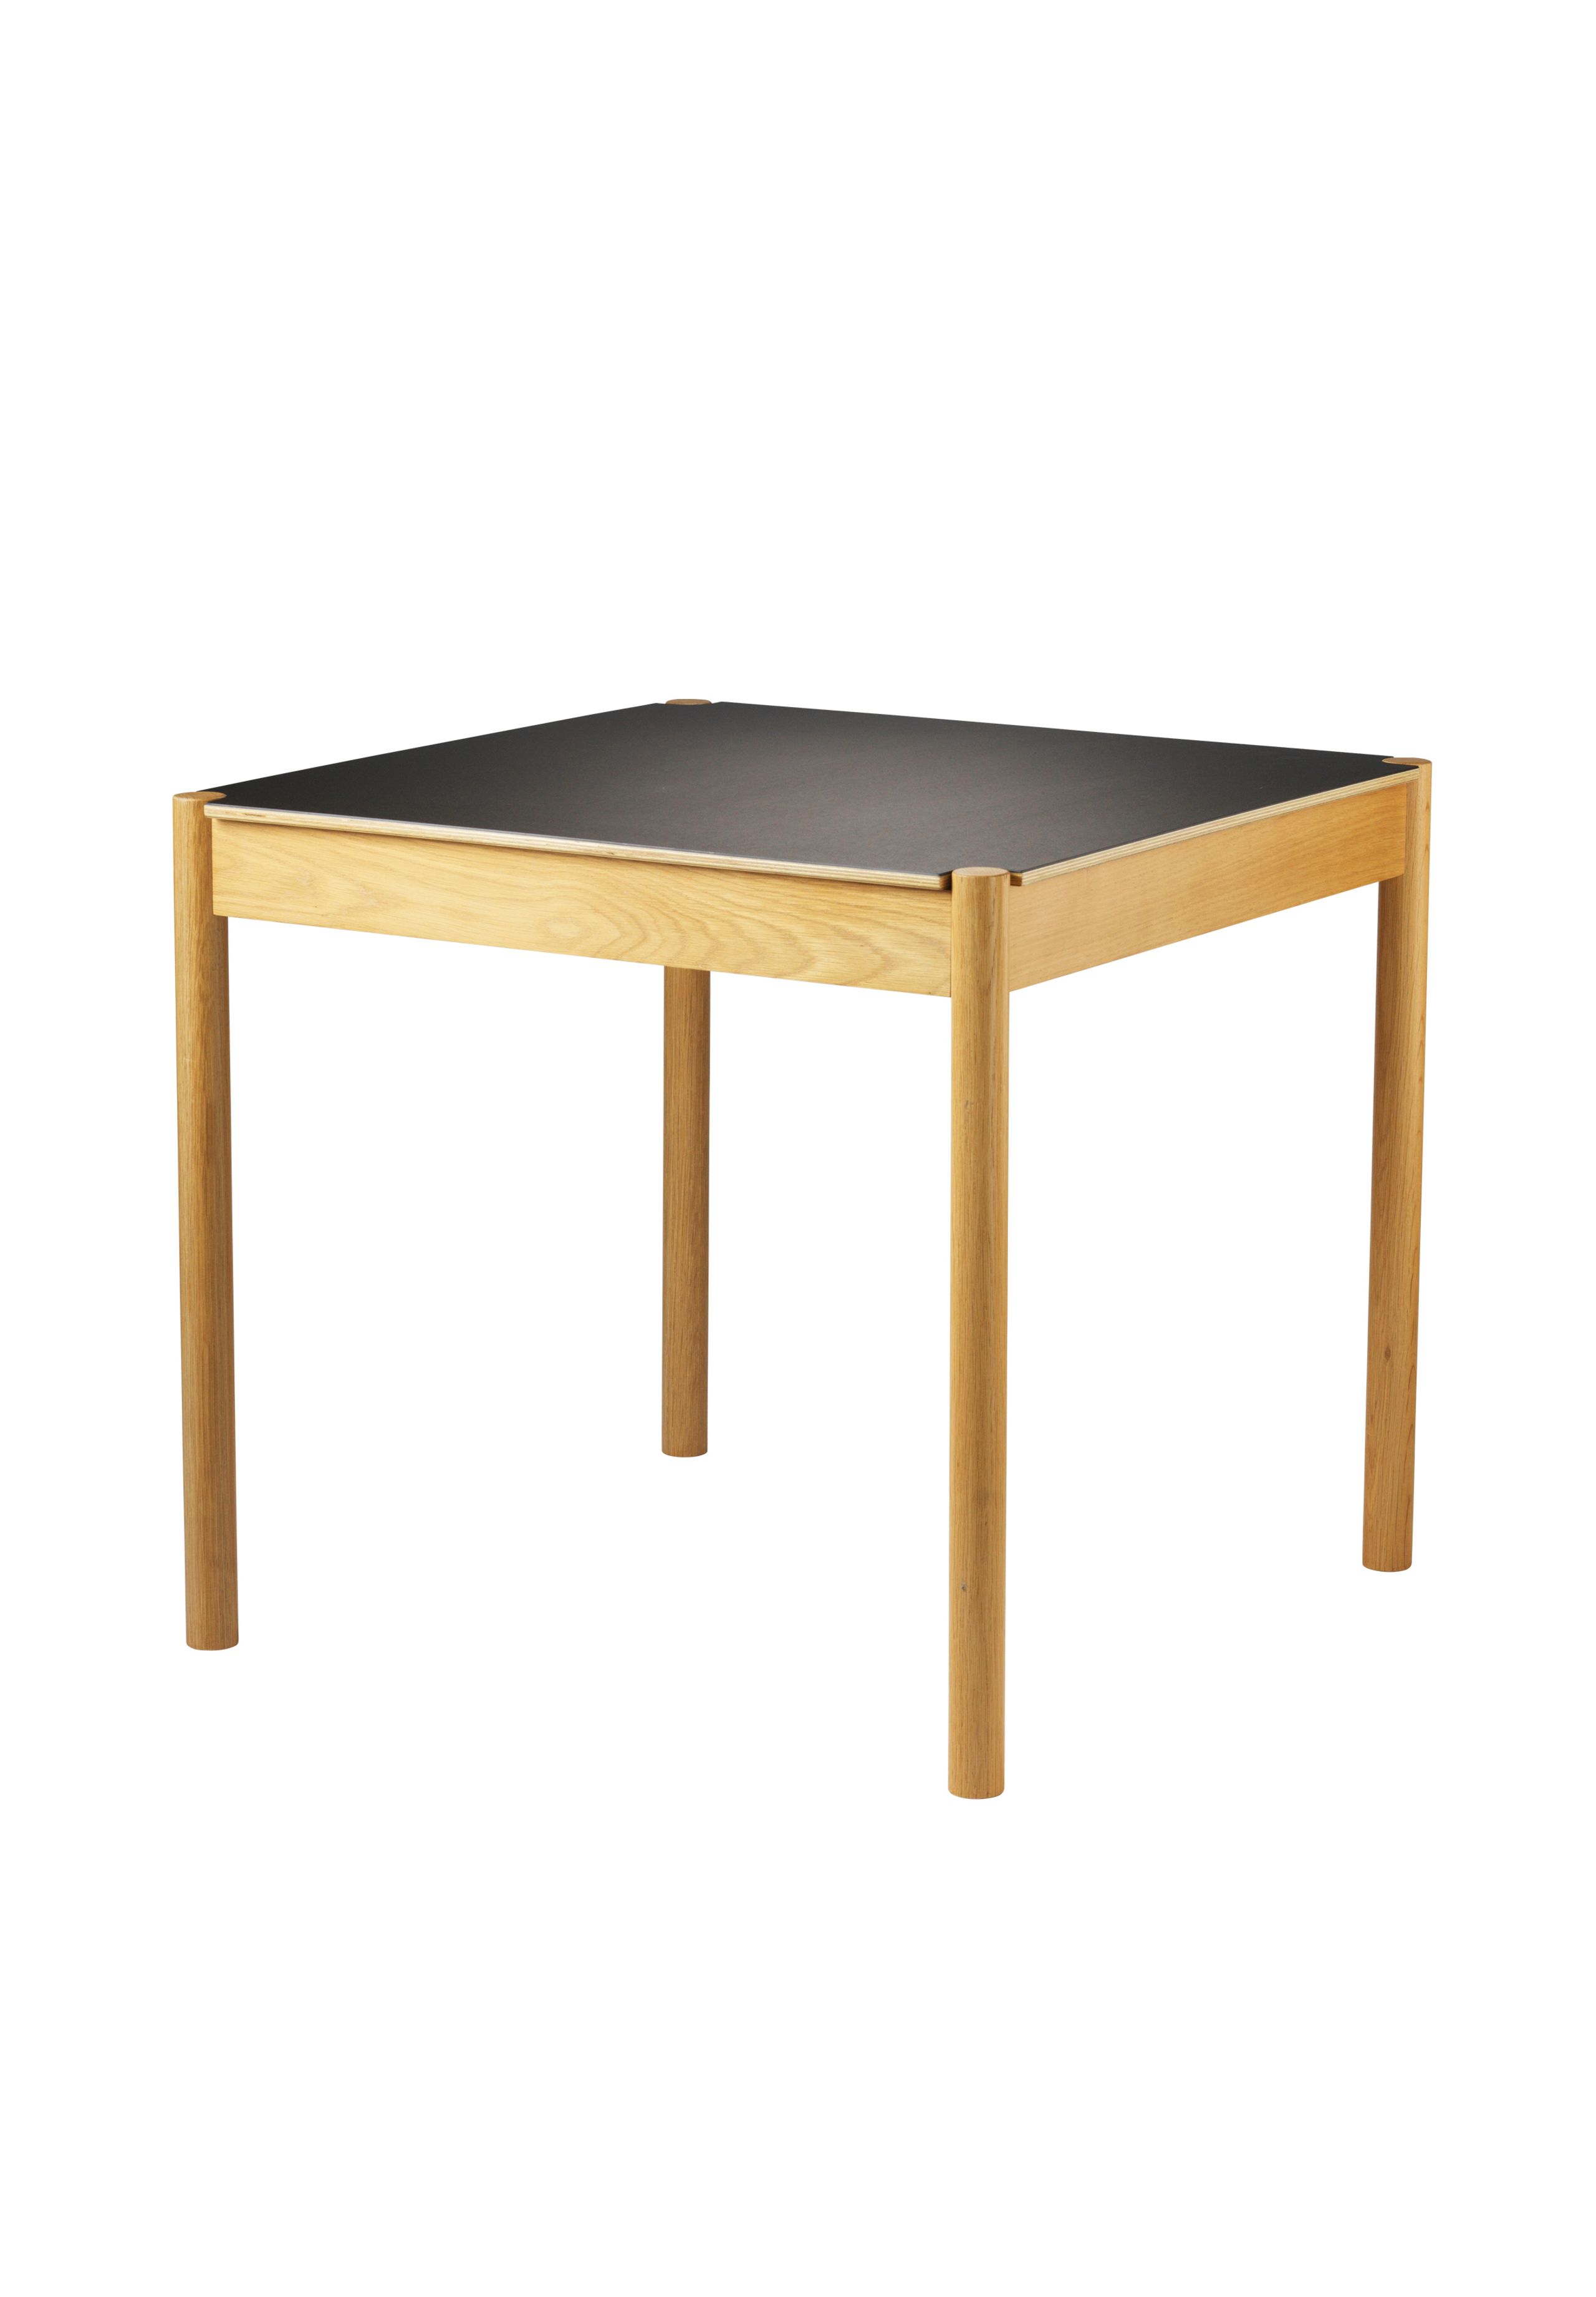 FDB Møbler / Furniture - Dining Table - C44 - Dining Table - Natur / Sort - Small